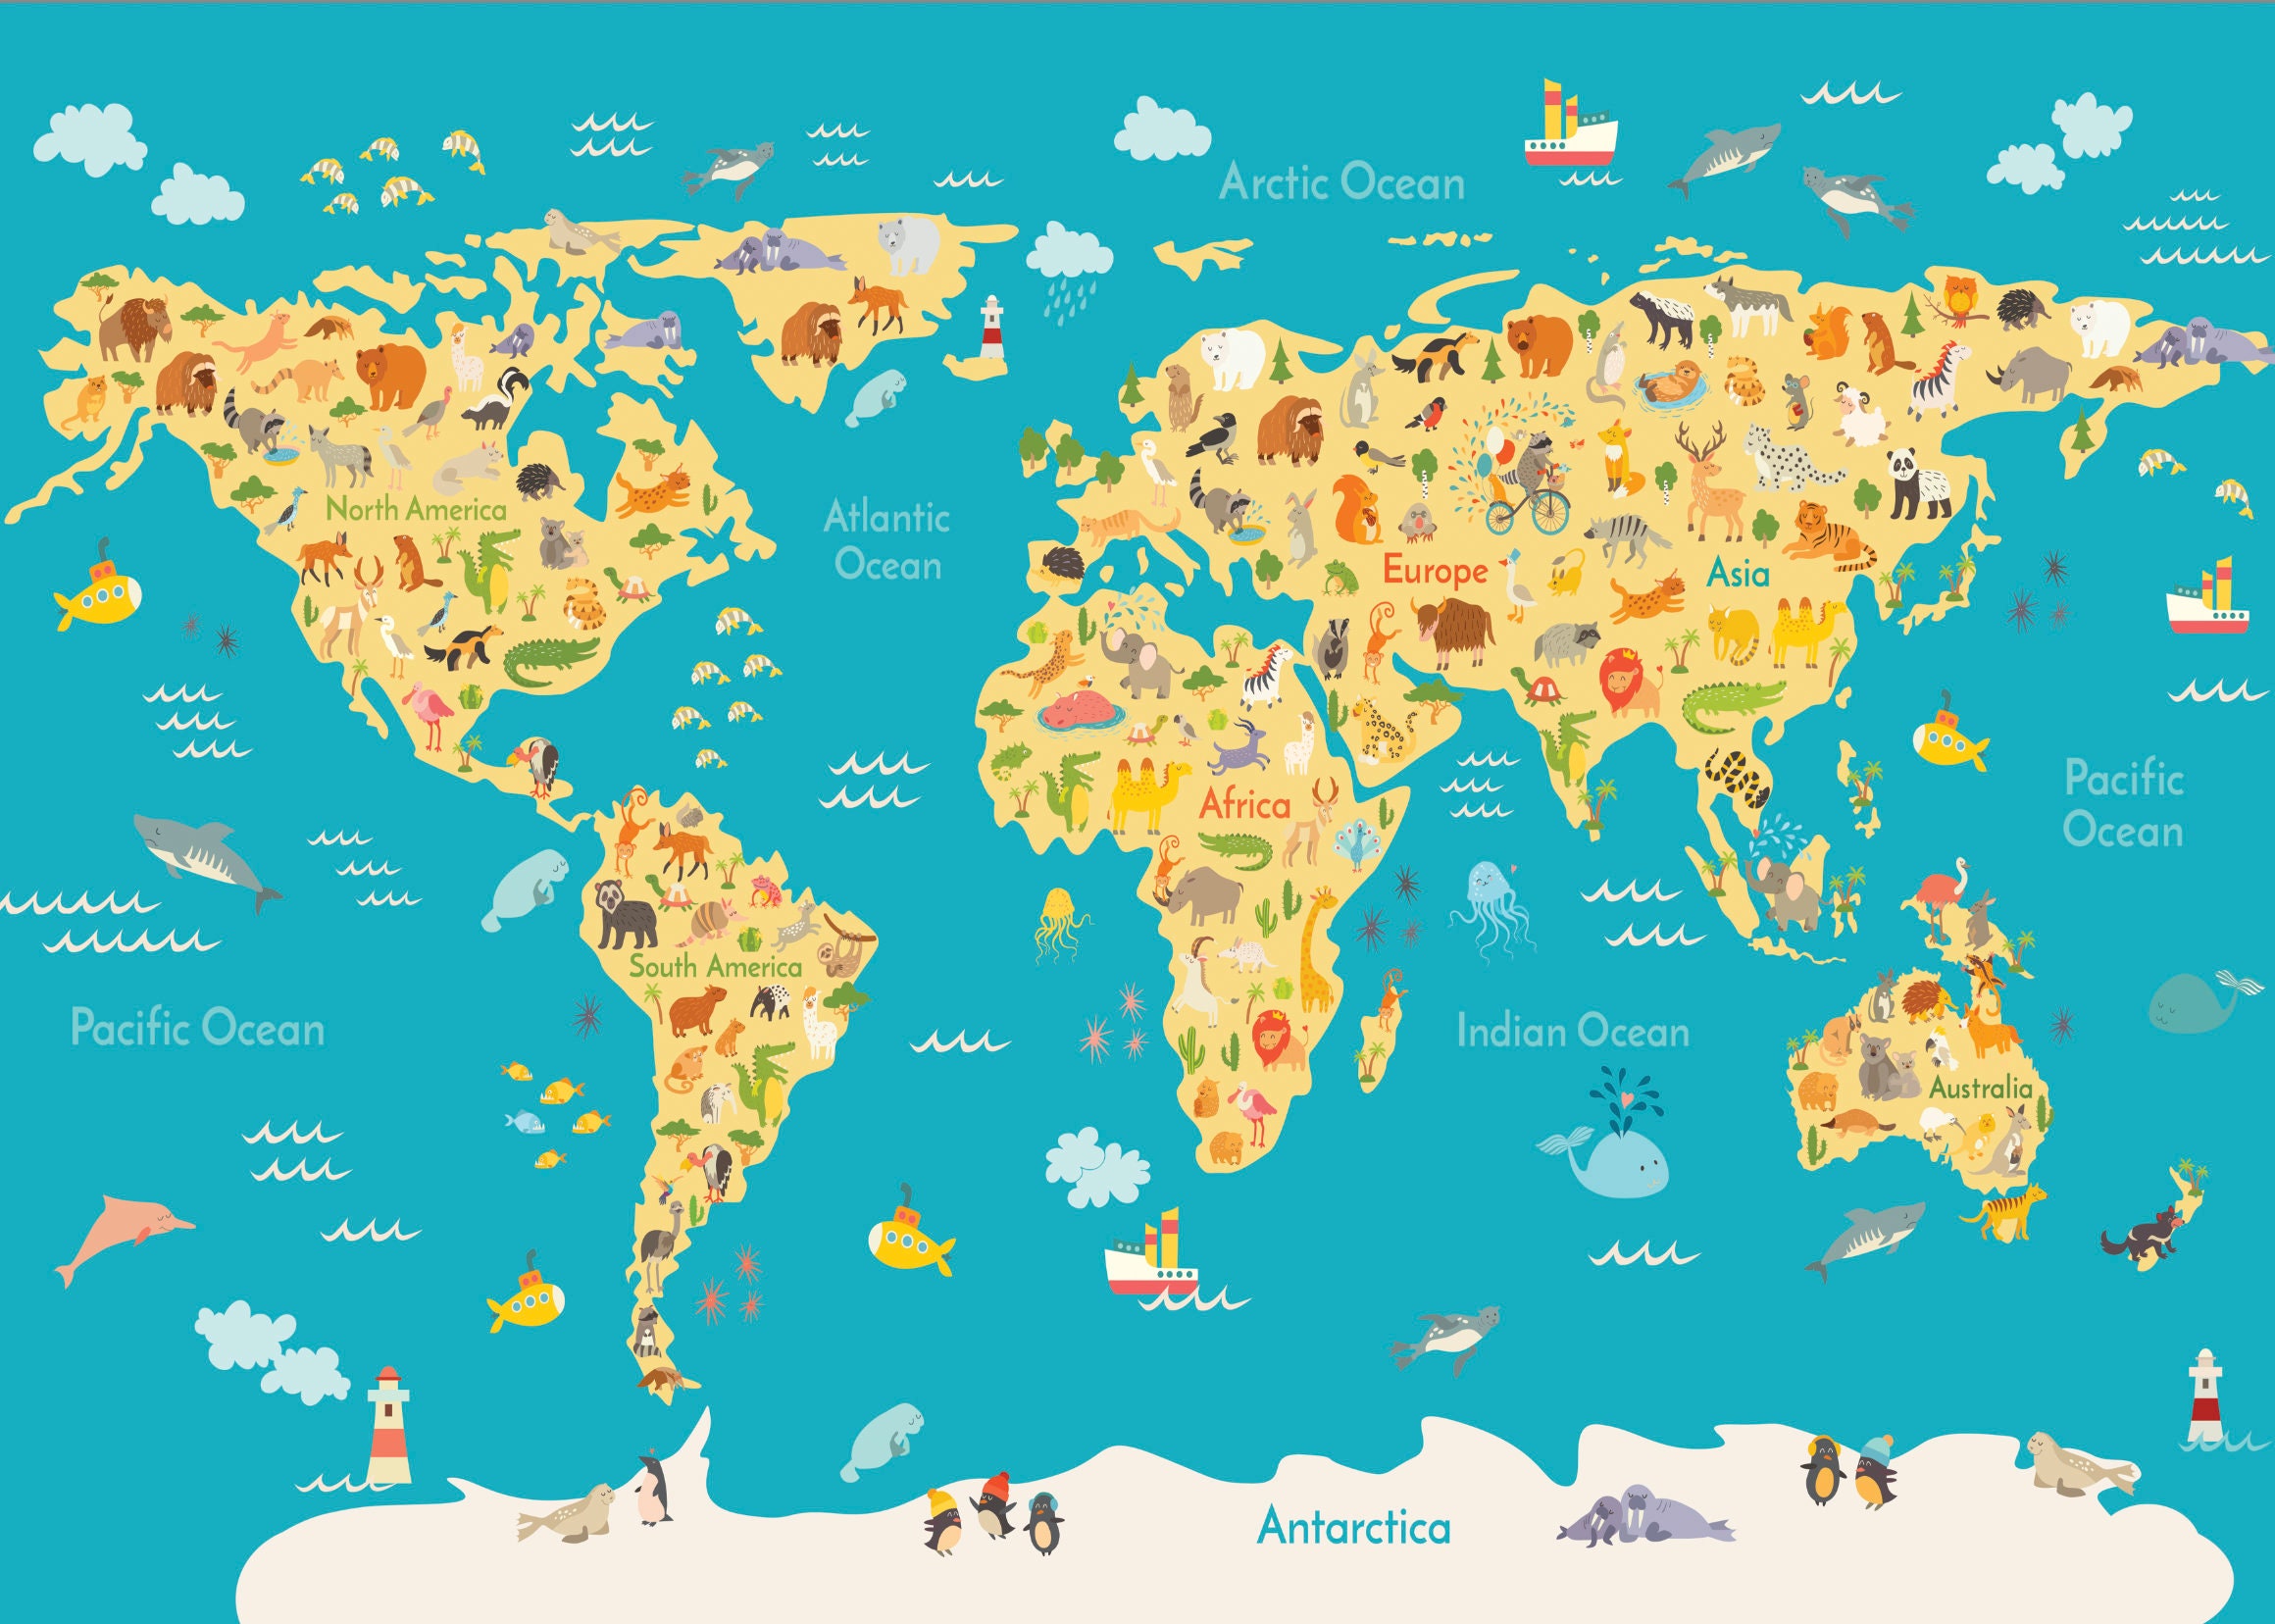 Educational World Map Resource for All Ages. Large, blank, foldable